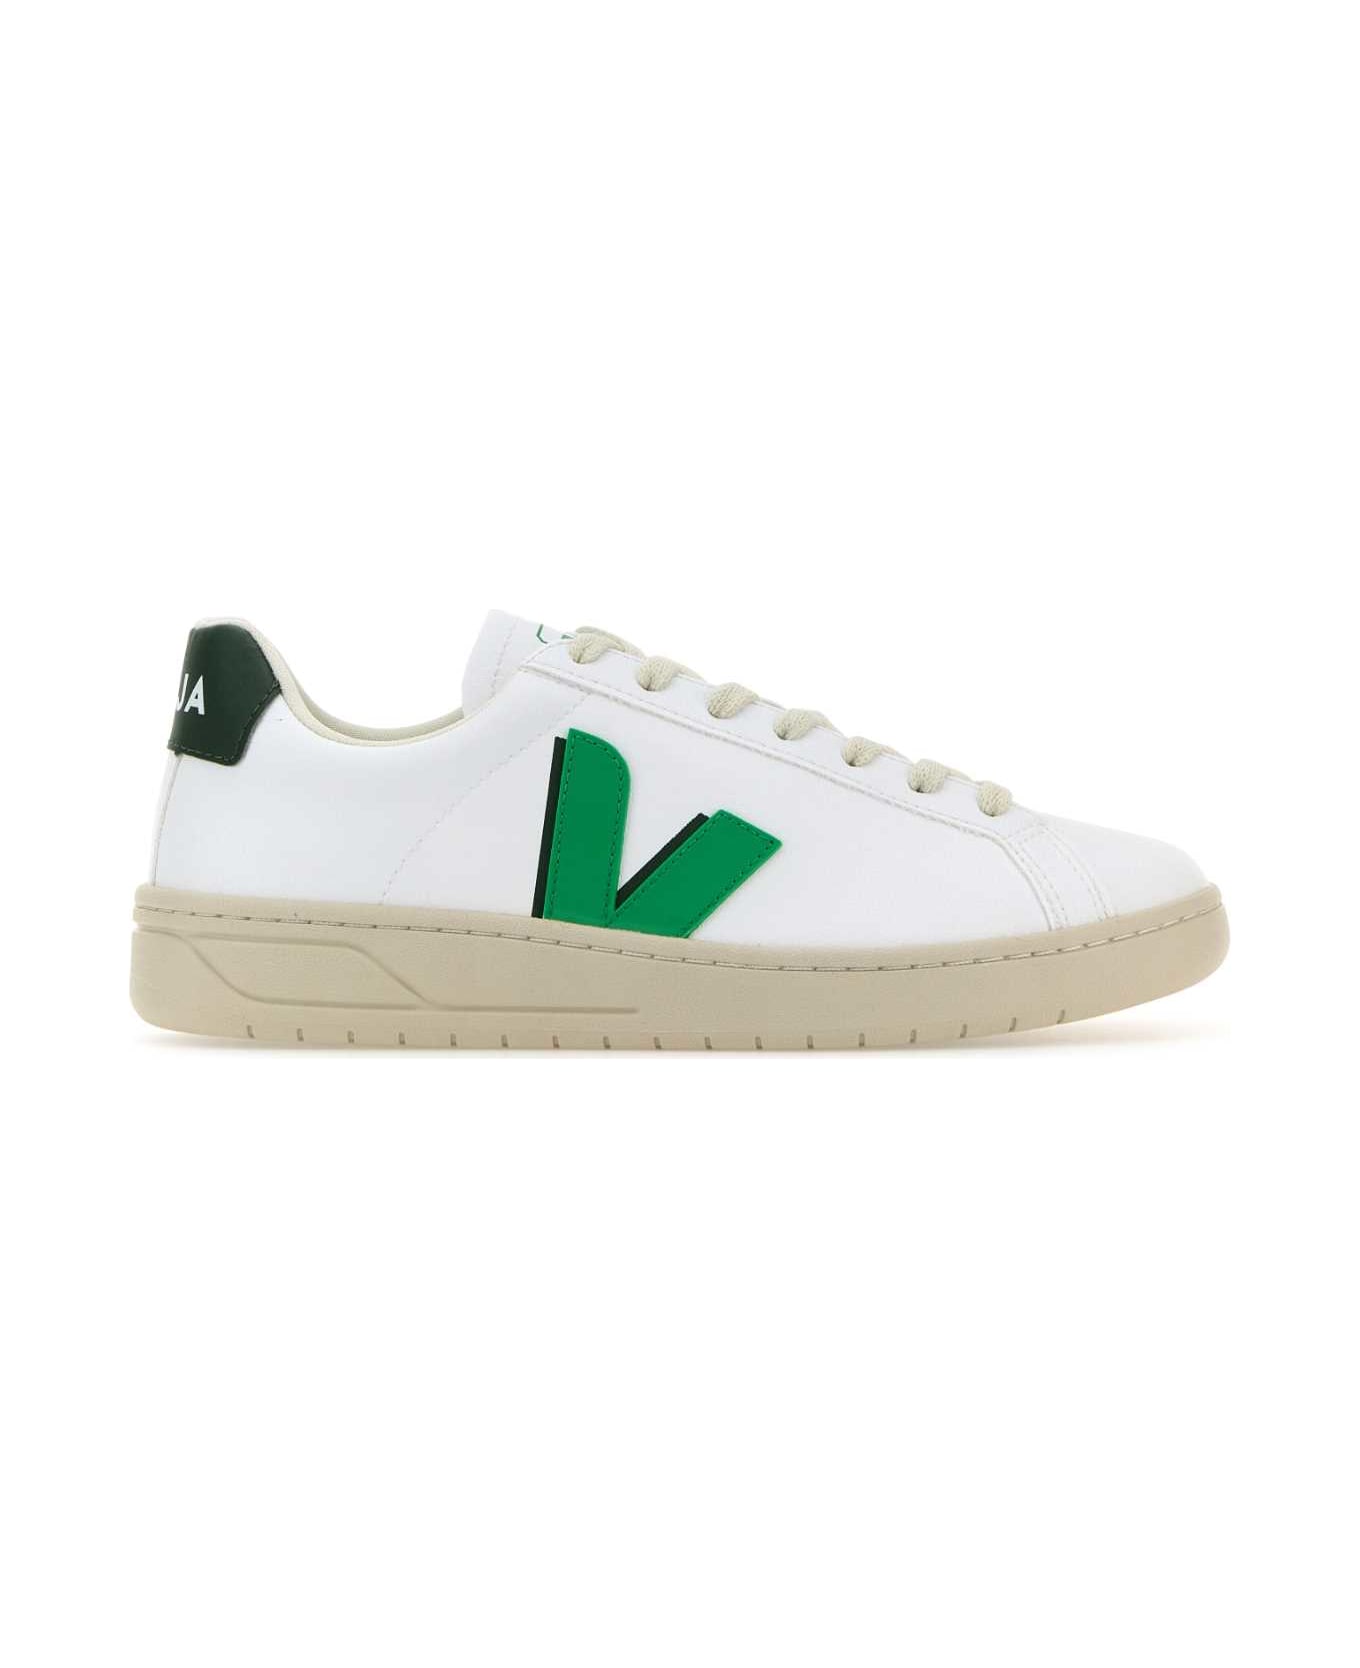 Veja White Synthetic Leather Urca Sneakers - WHITELEAFCYPRUS スニーカー